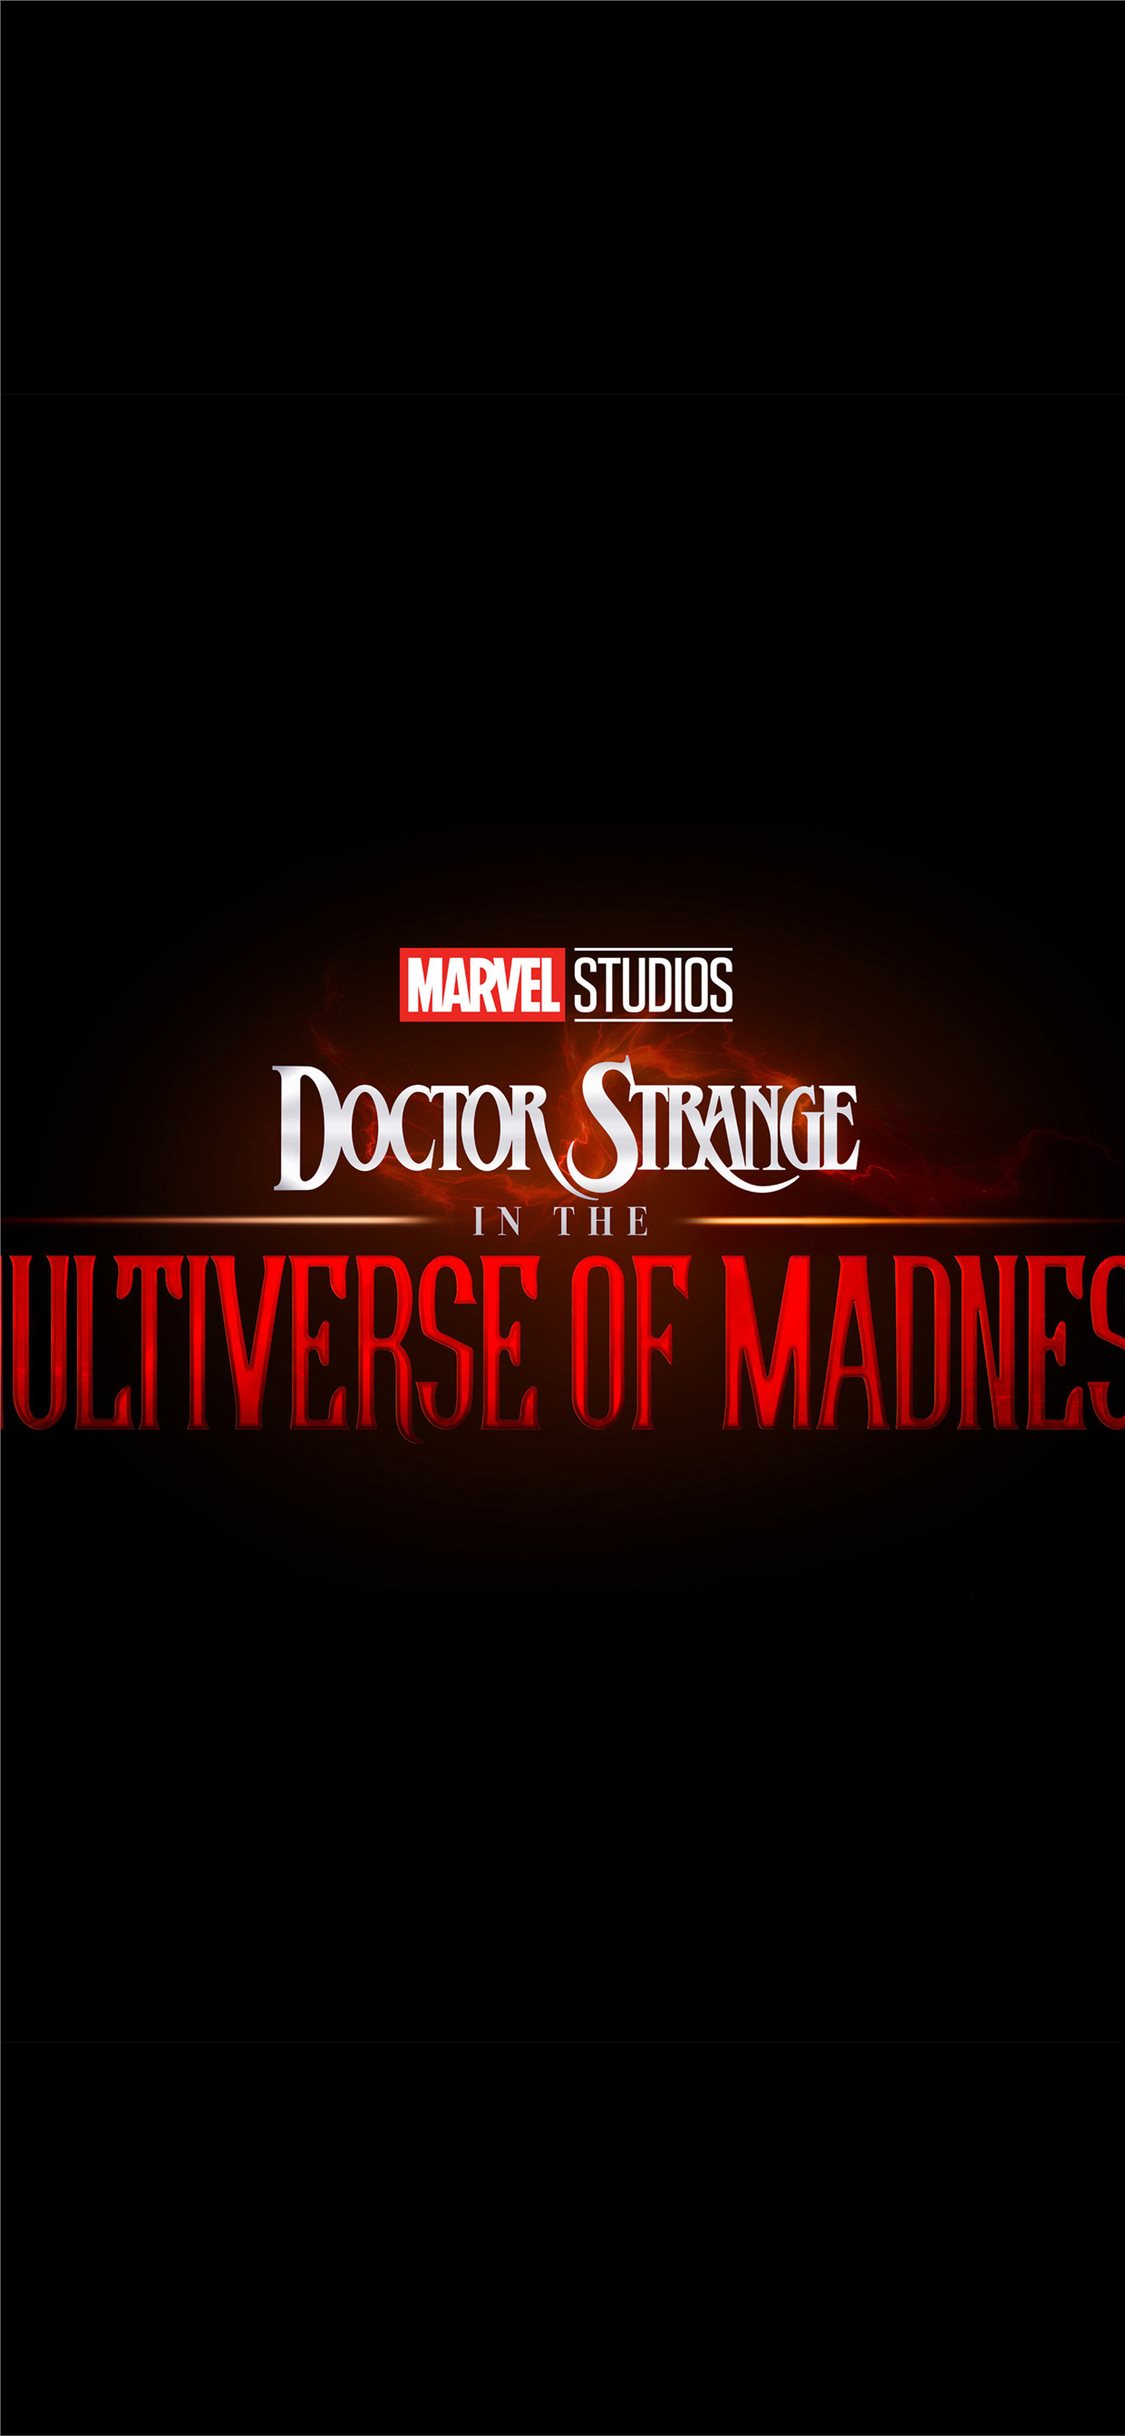 Doctor Strange in the Multiverse of M download the last version for apple